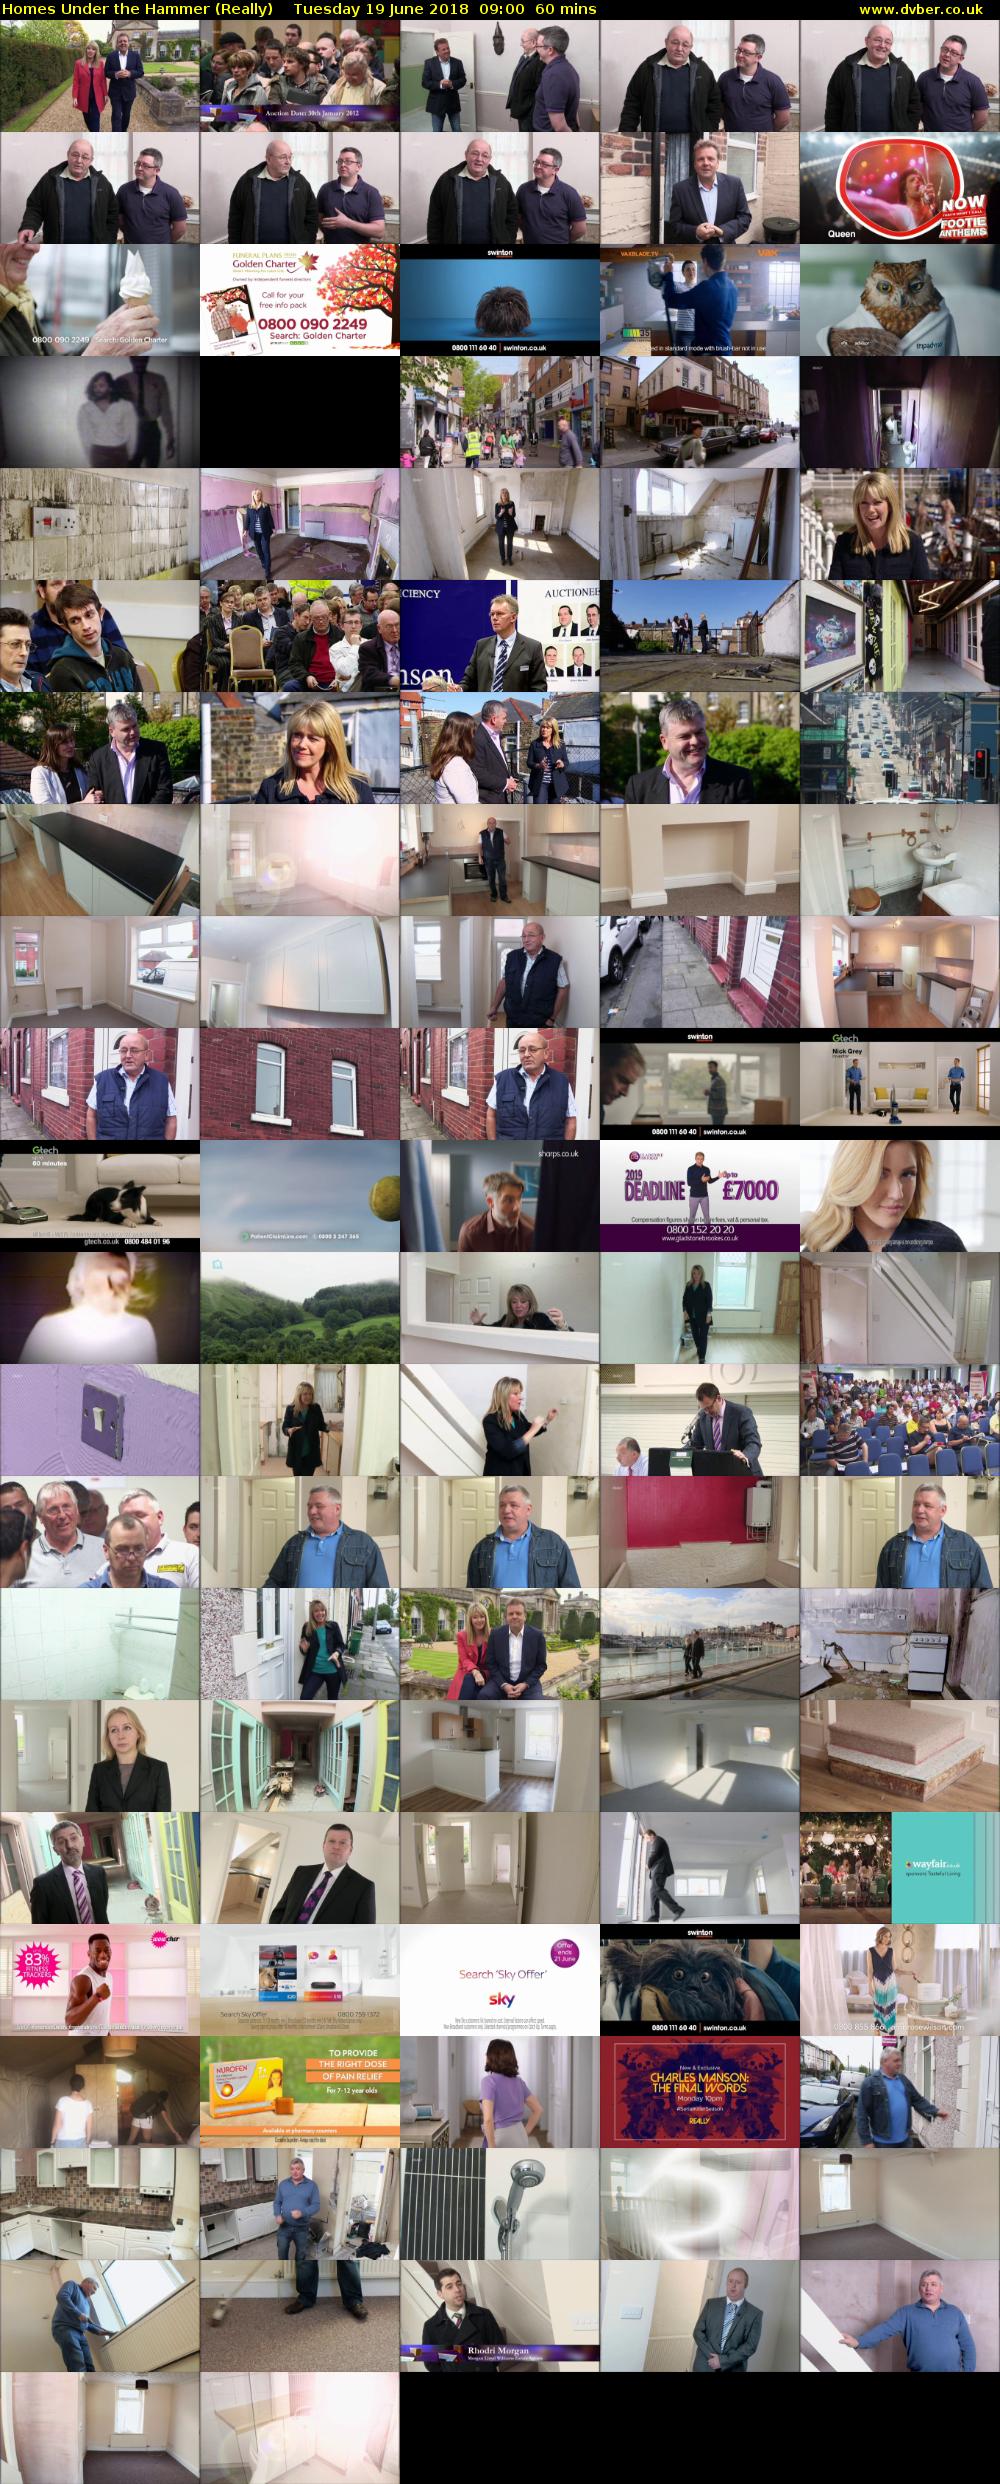 Homes Under the Hammer (Really) Tuesday 19 June 2018 09:00 - 10:00